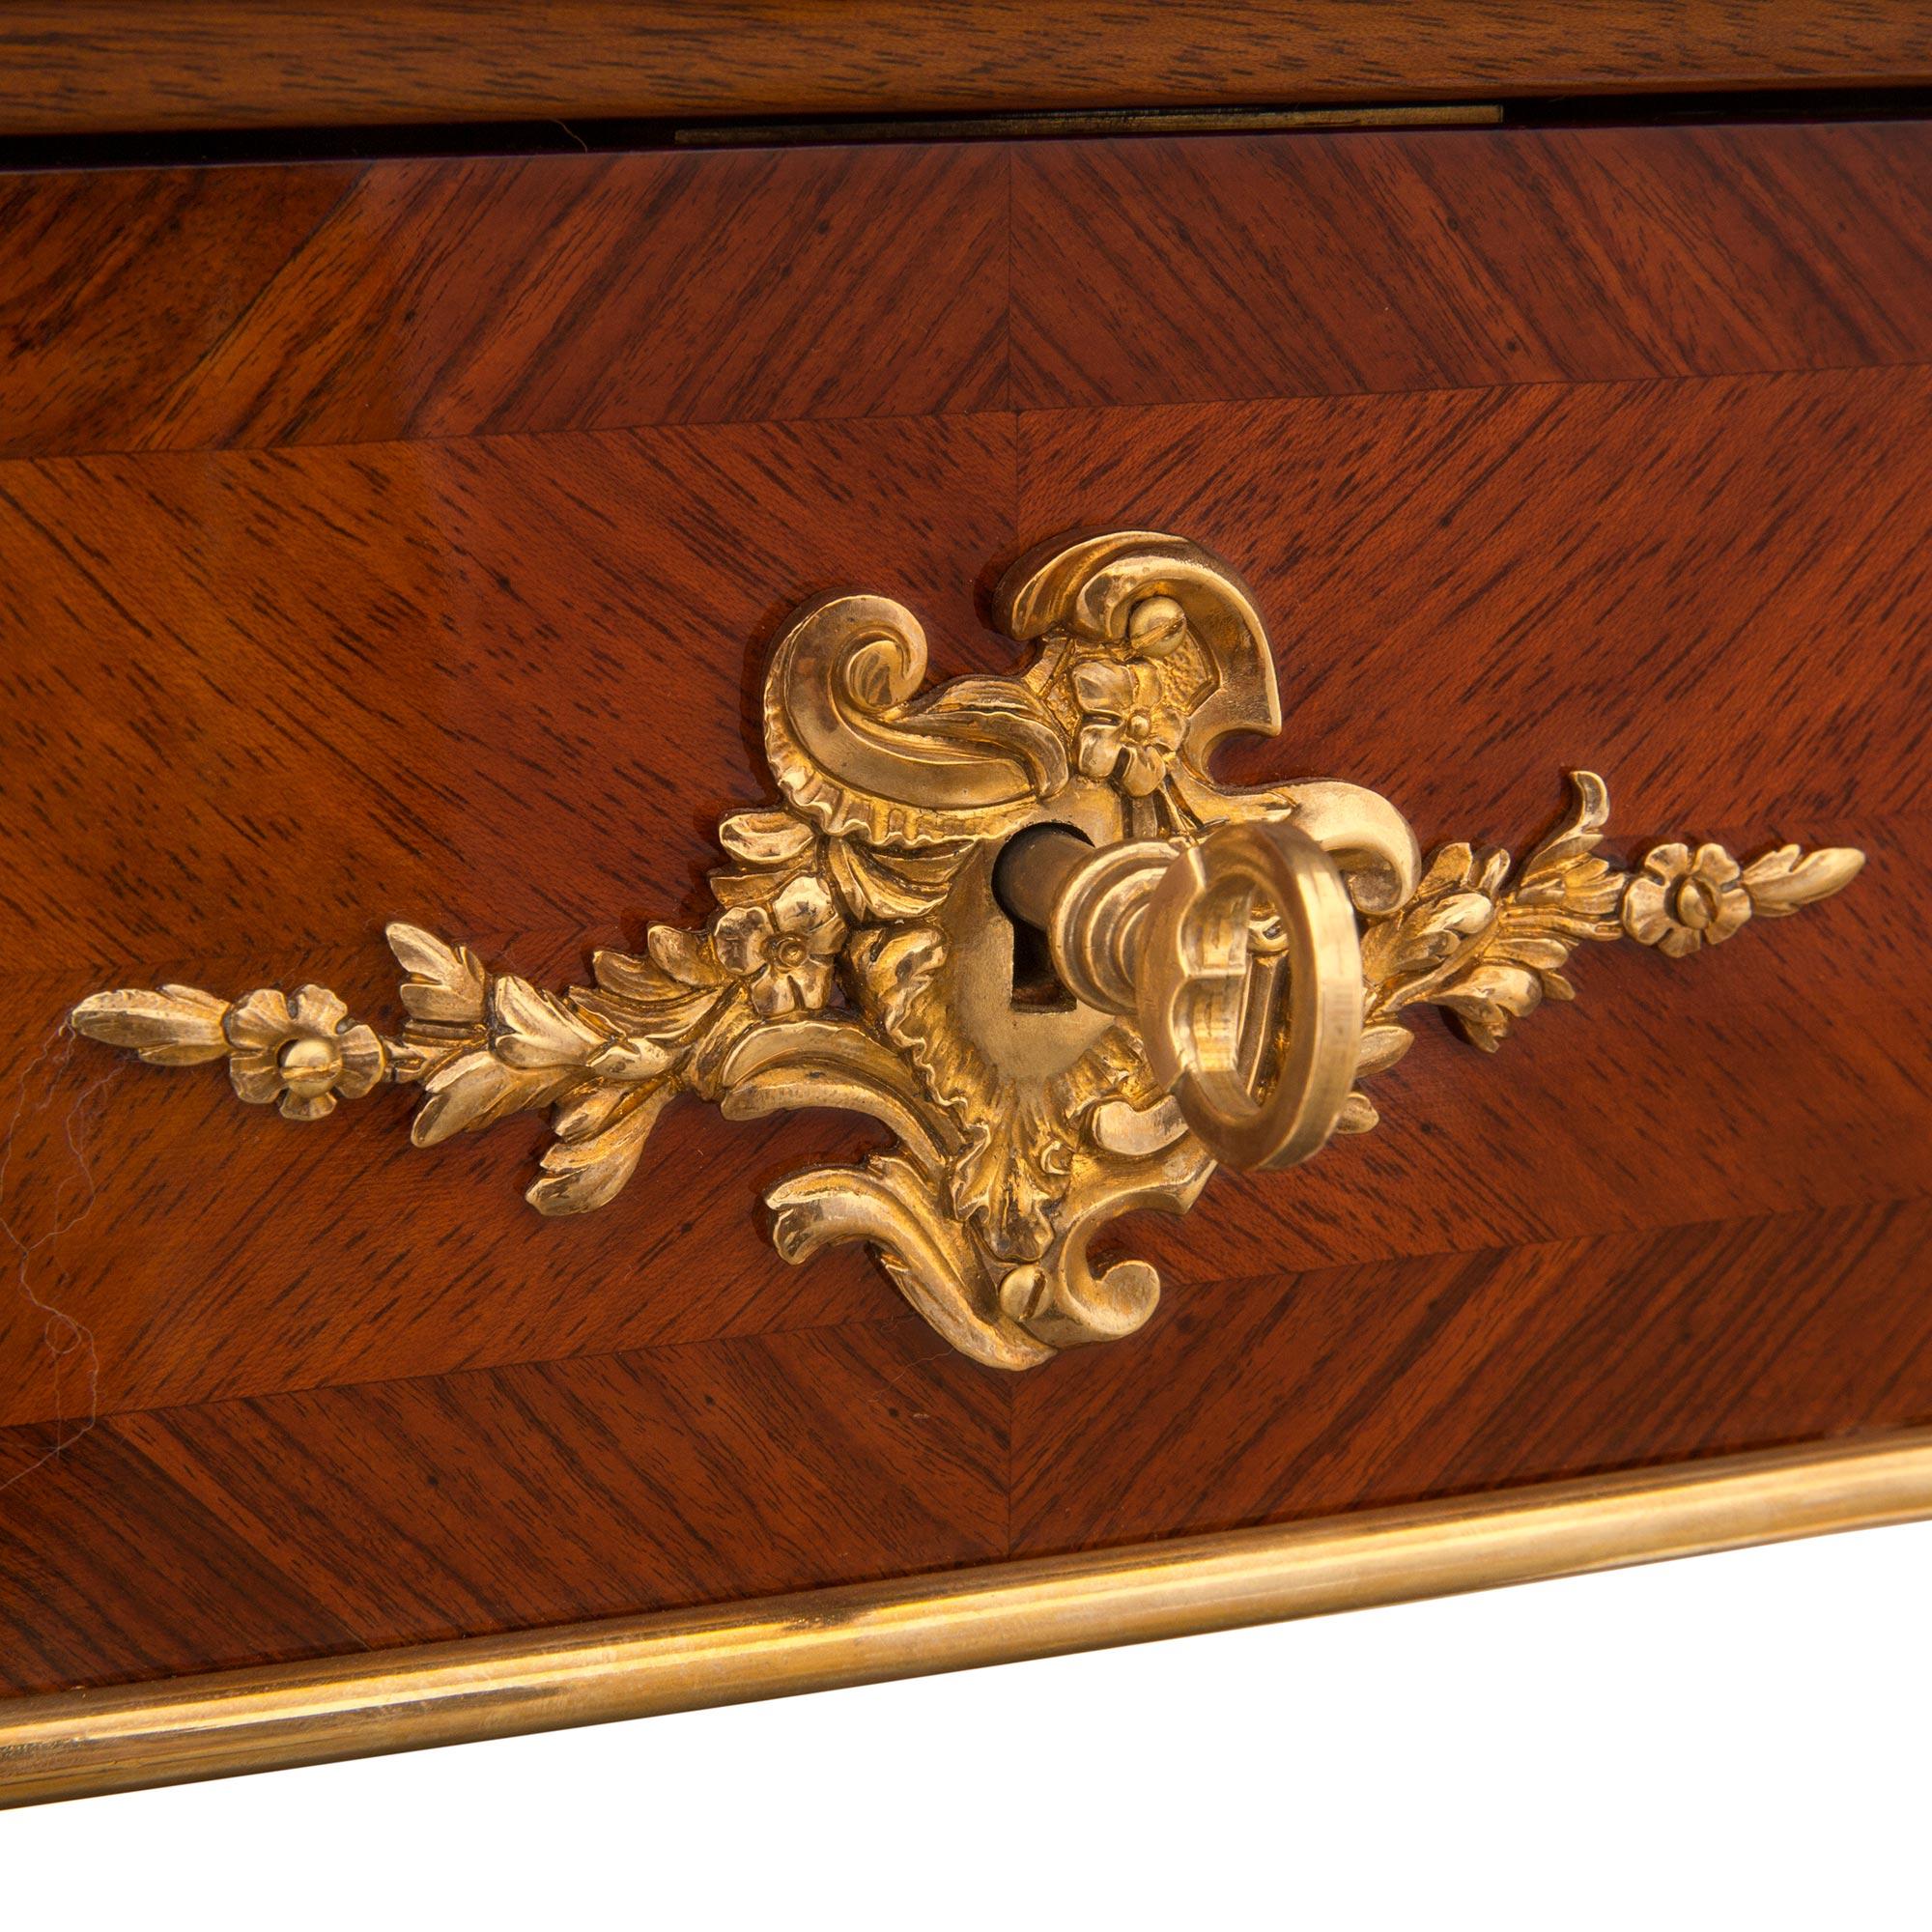 French Mid-19th Century Louis XV Style Kingwood and Ormolu Bureau Plat For Sale 3